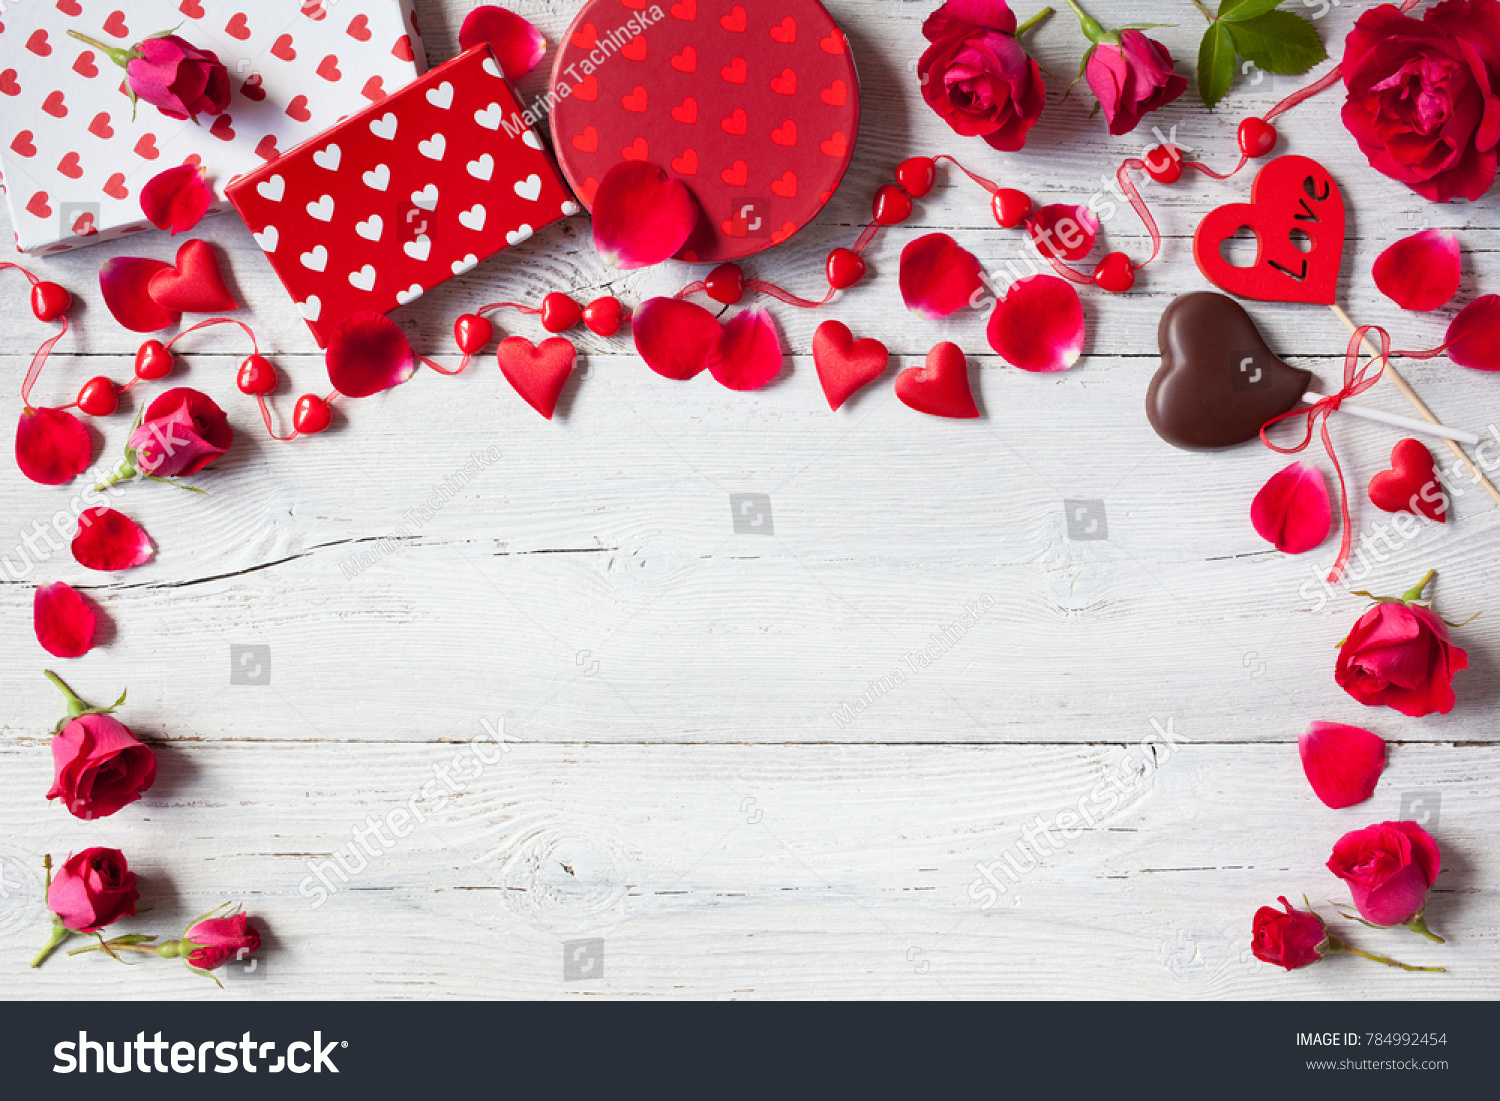 Roses and red hearts on a wooden background and gifts in boxes #784992454